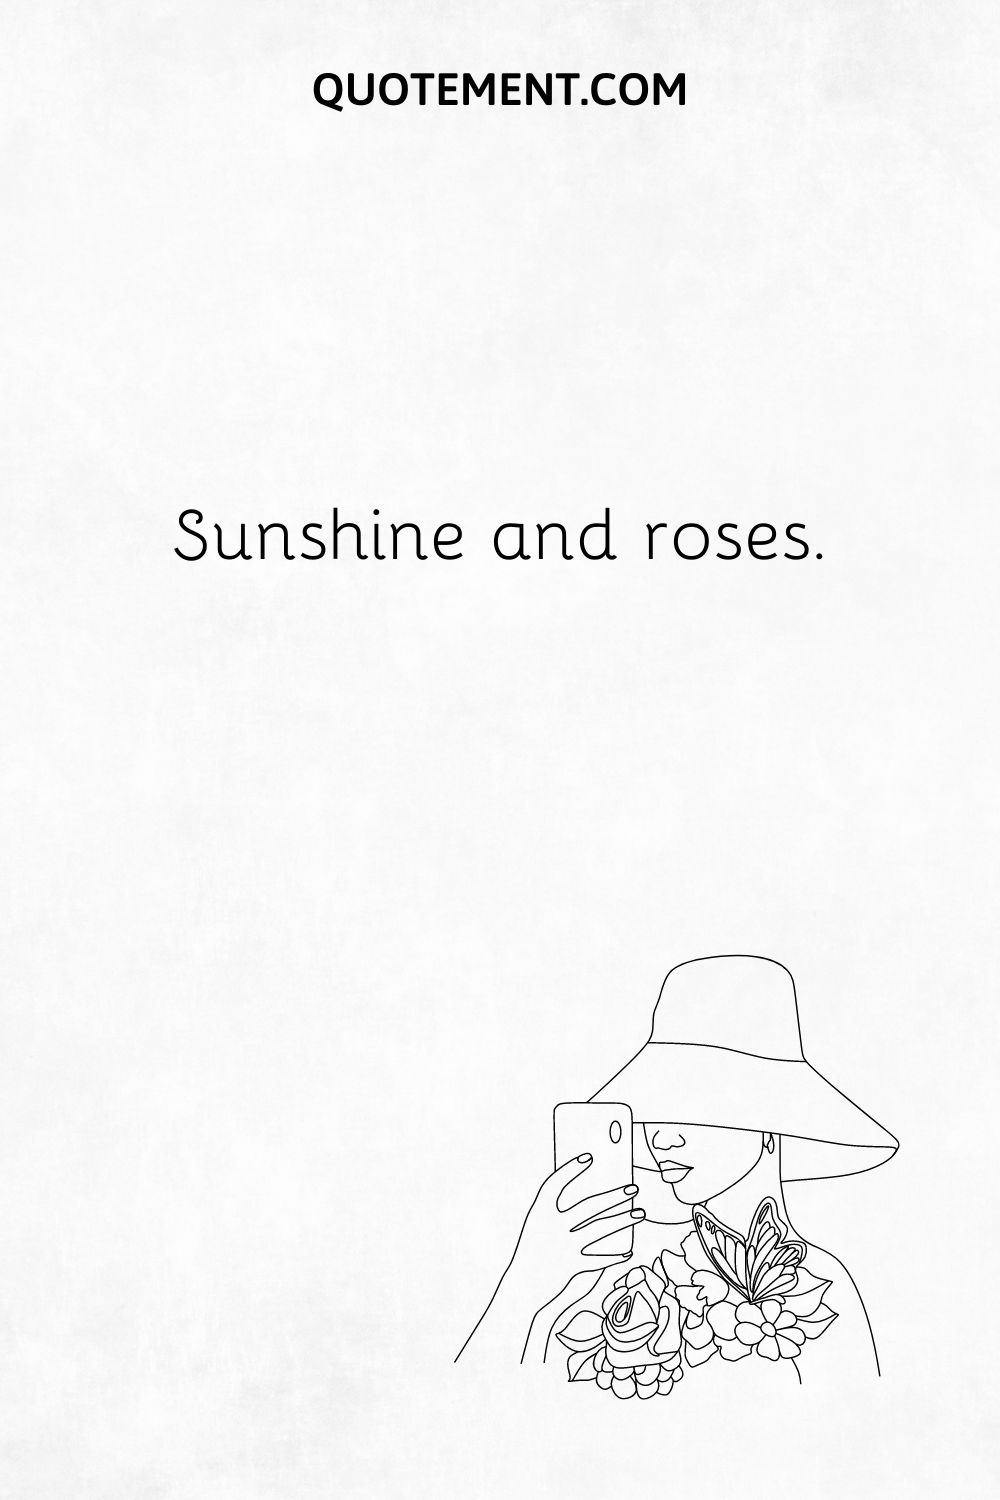 Sunshine and roses.